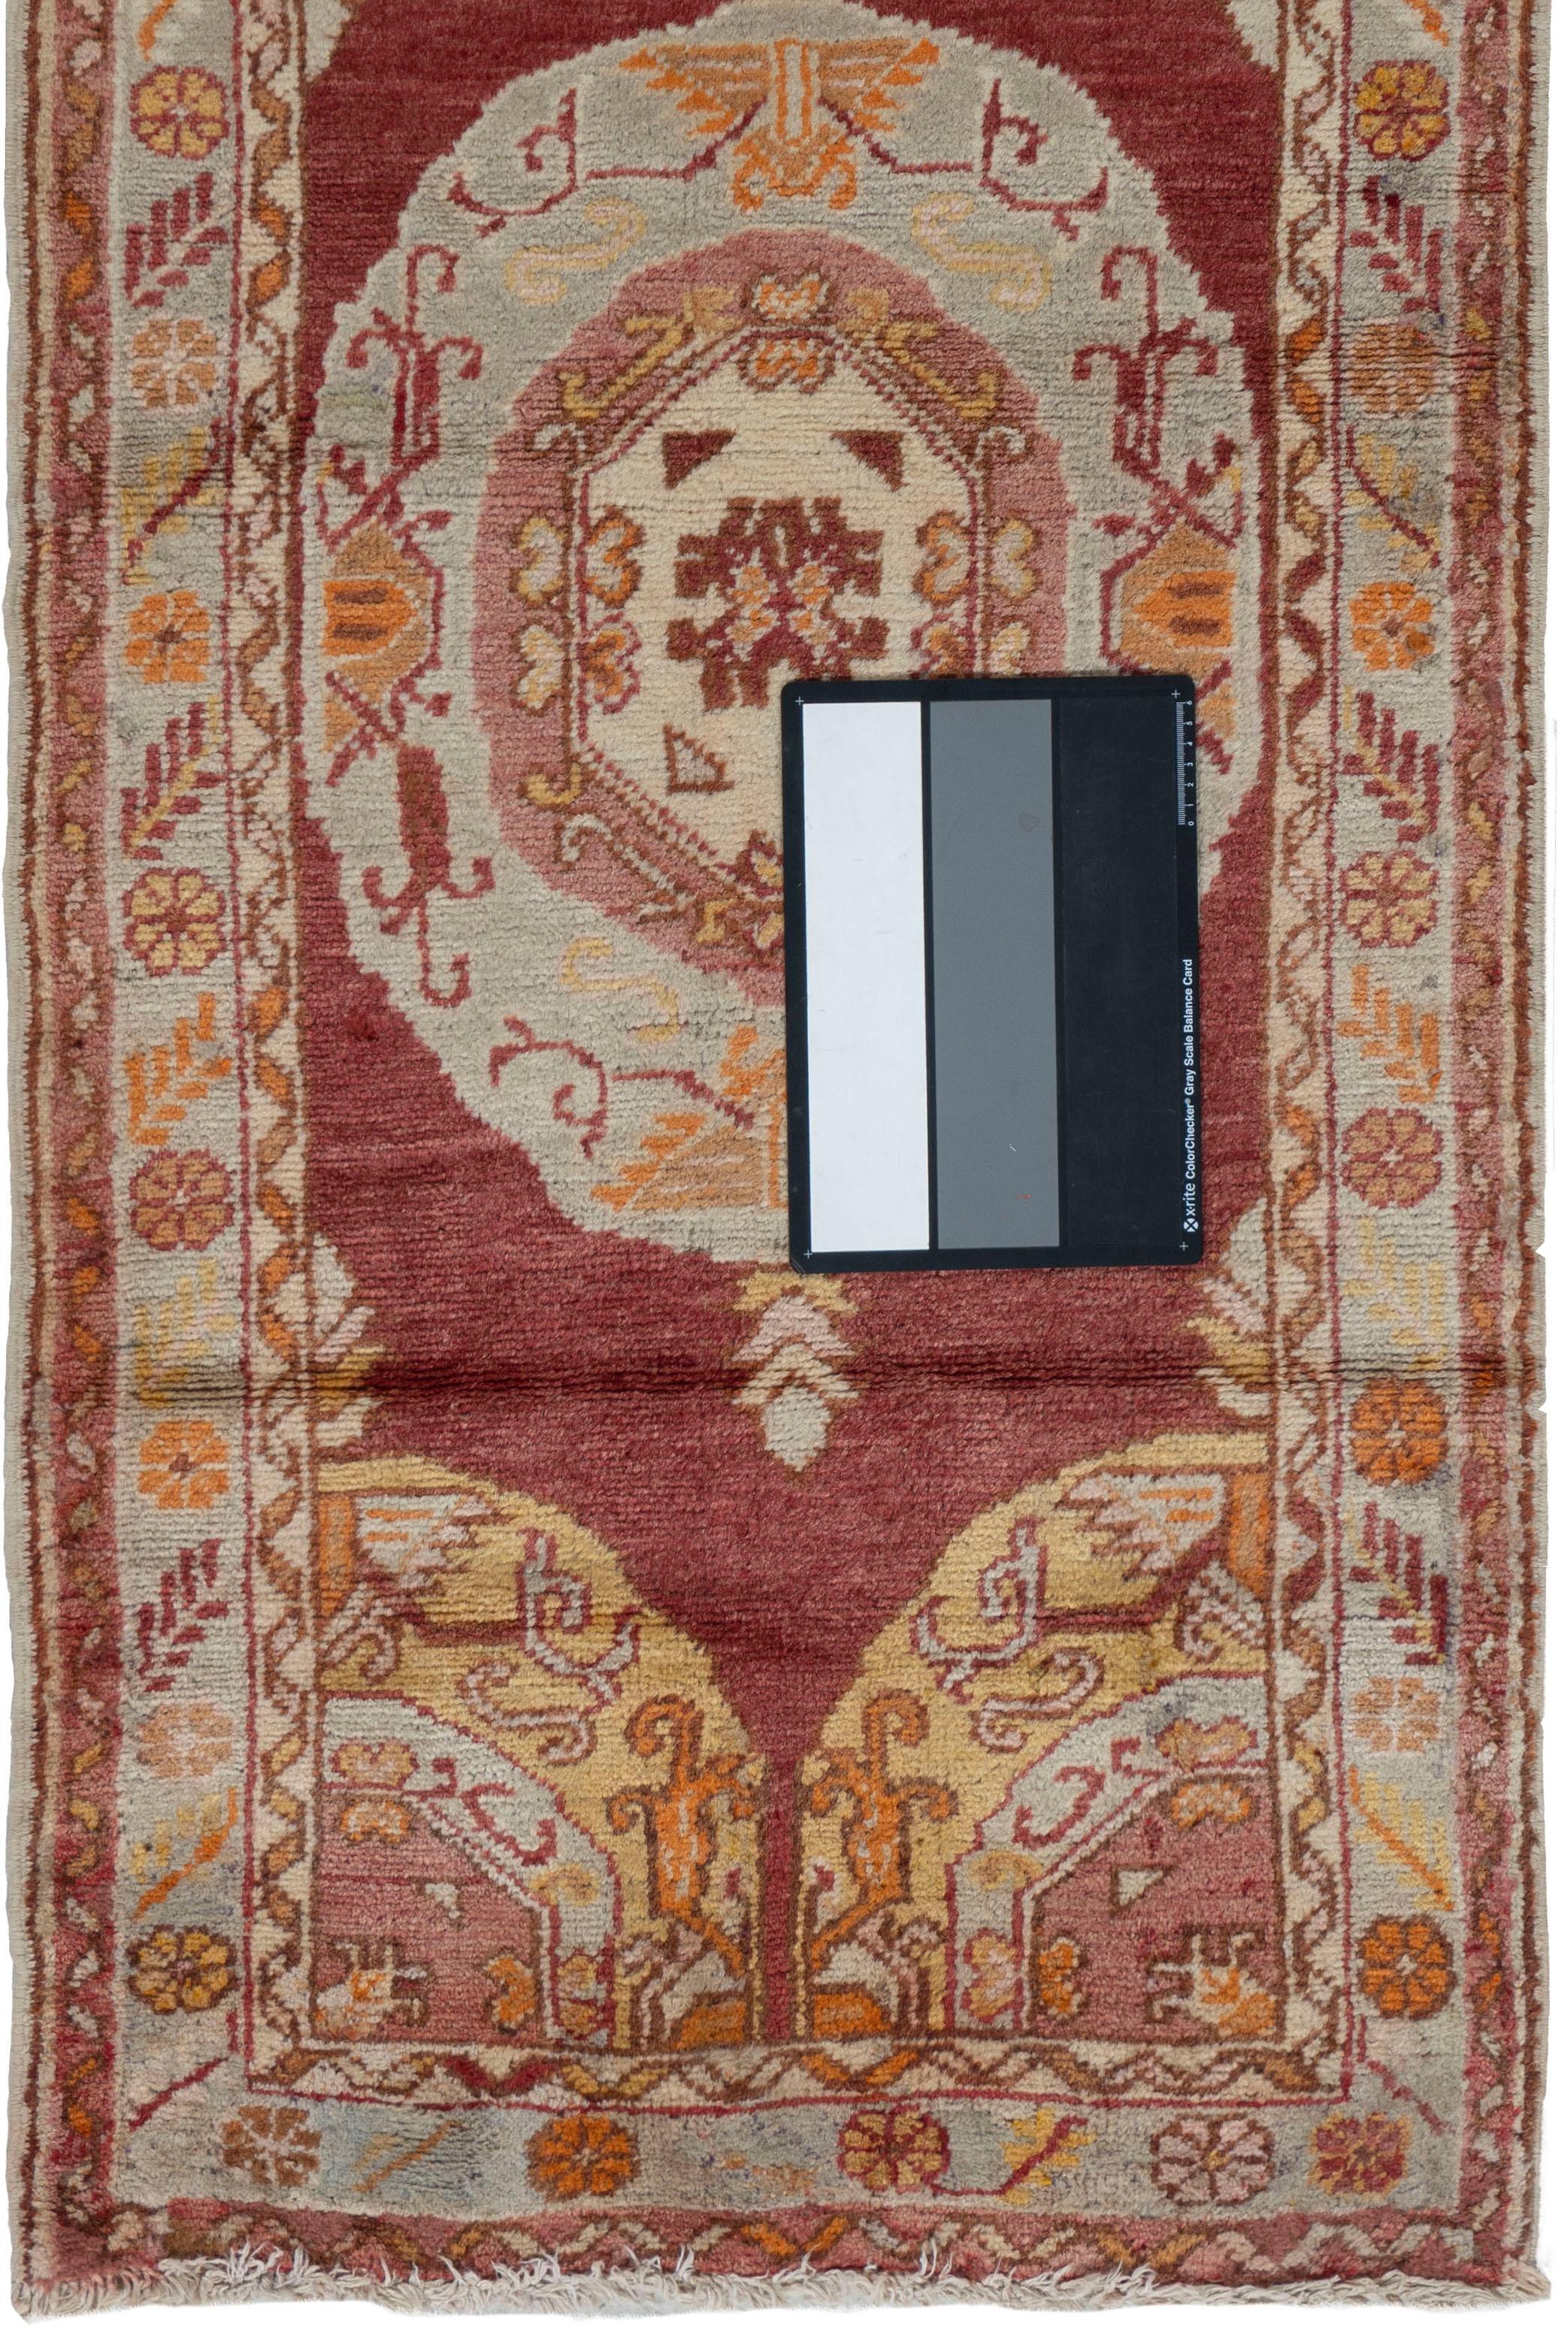 Hand-Woven Vintage Turkish Oushak Area Rug  2'6x5'3 For Sale